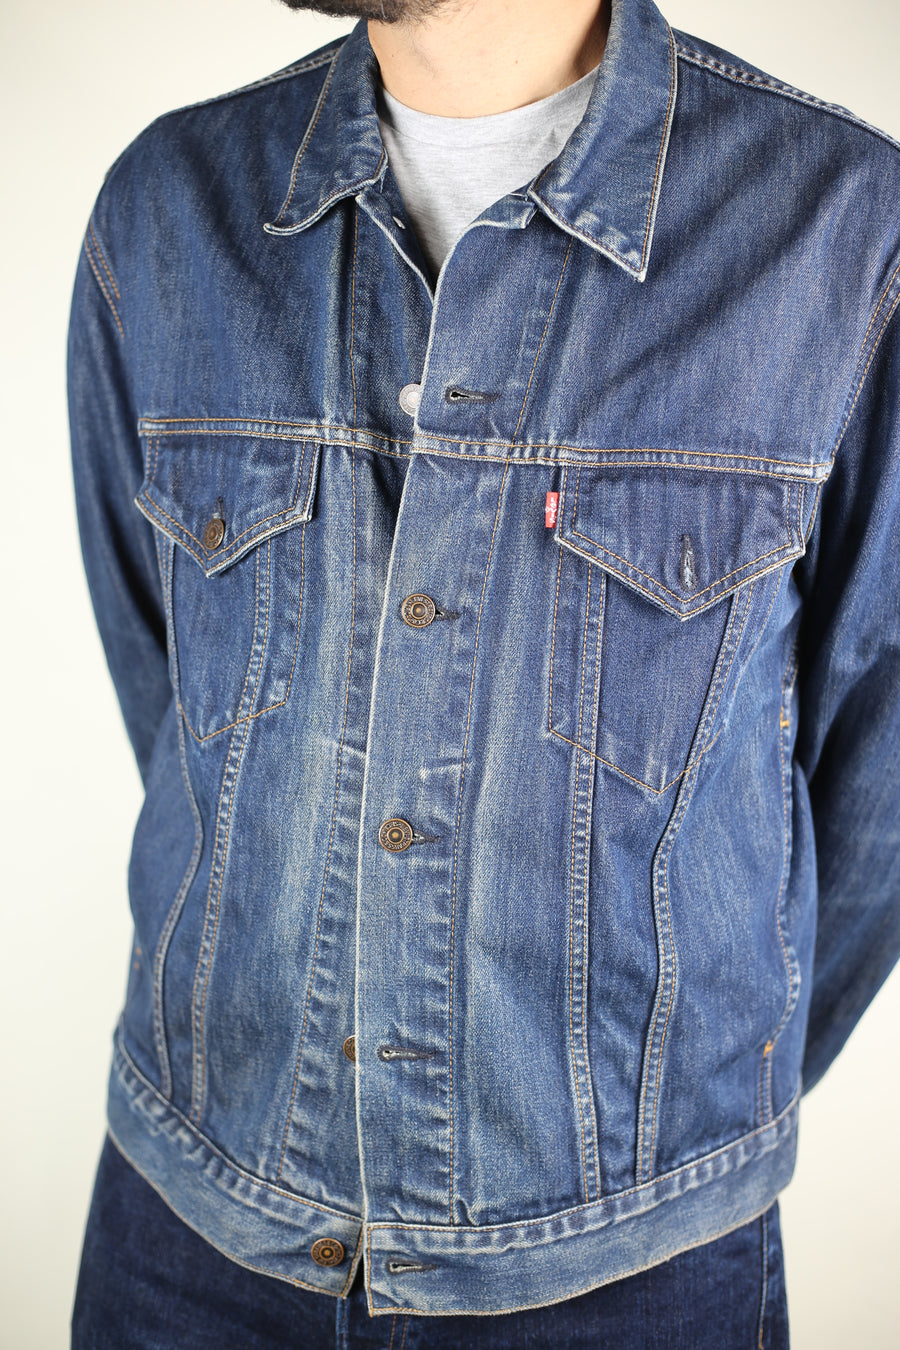 Giacca di Jeans LEVIS - XL  -